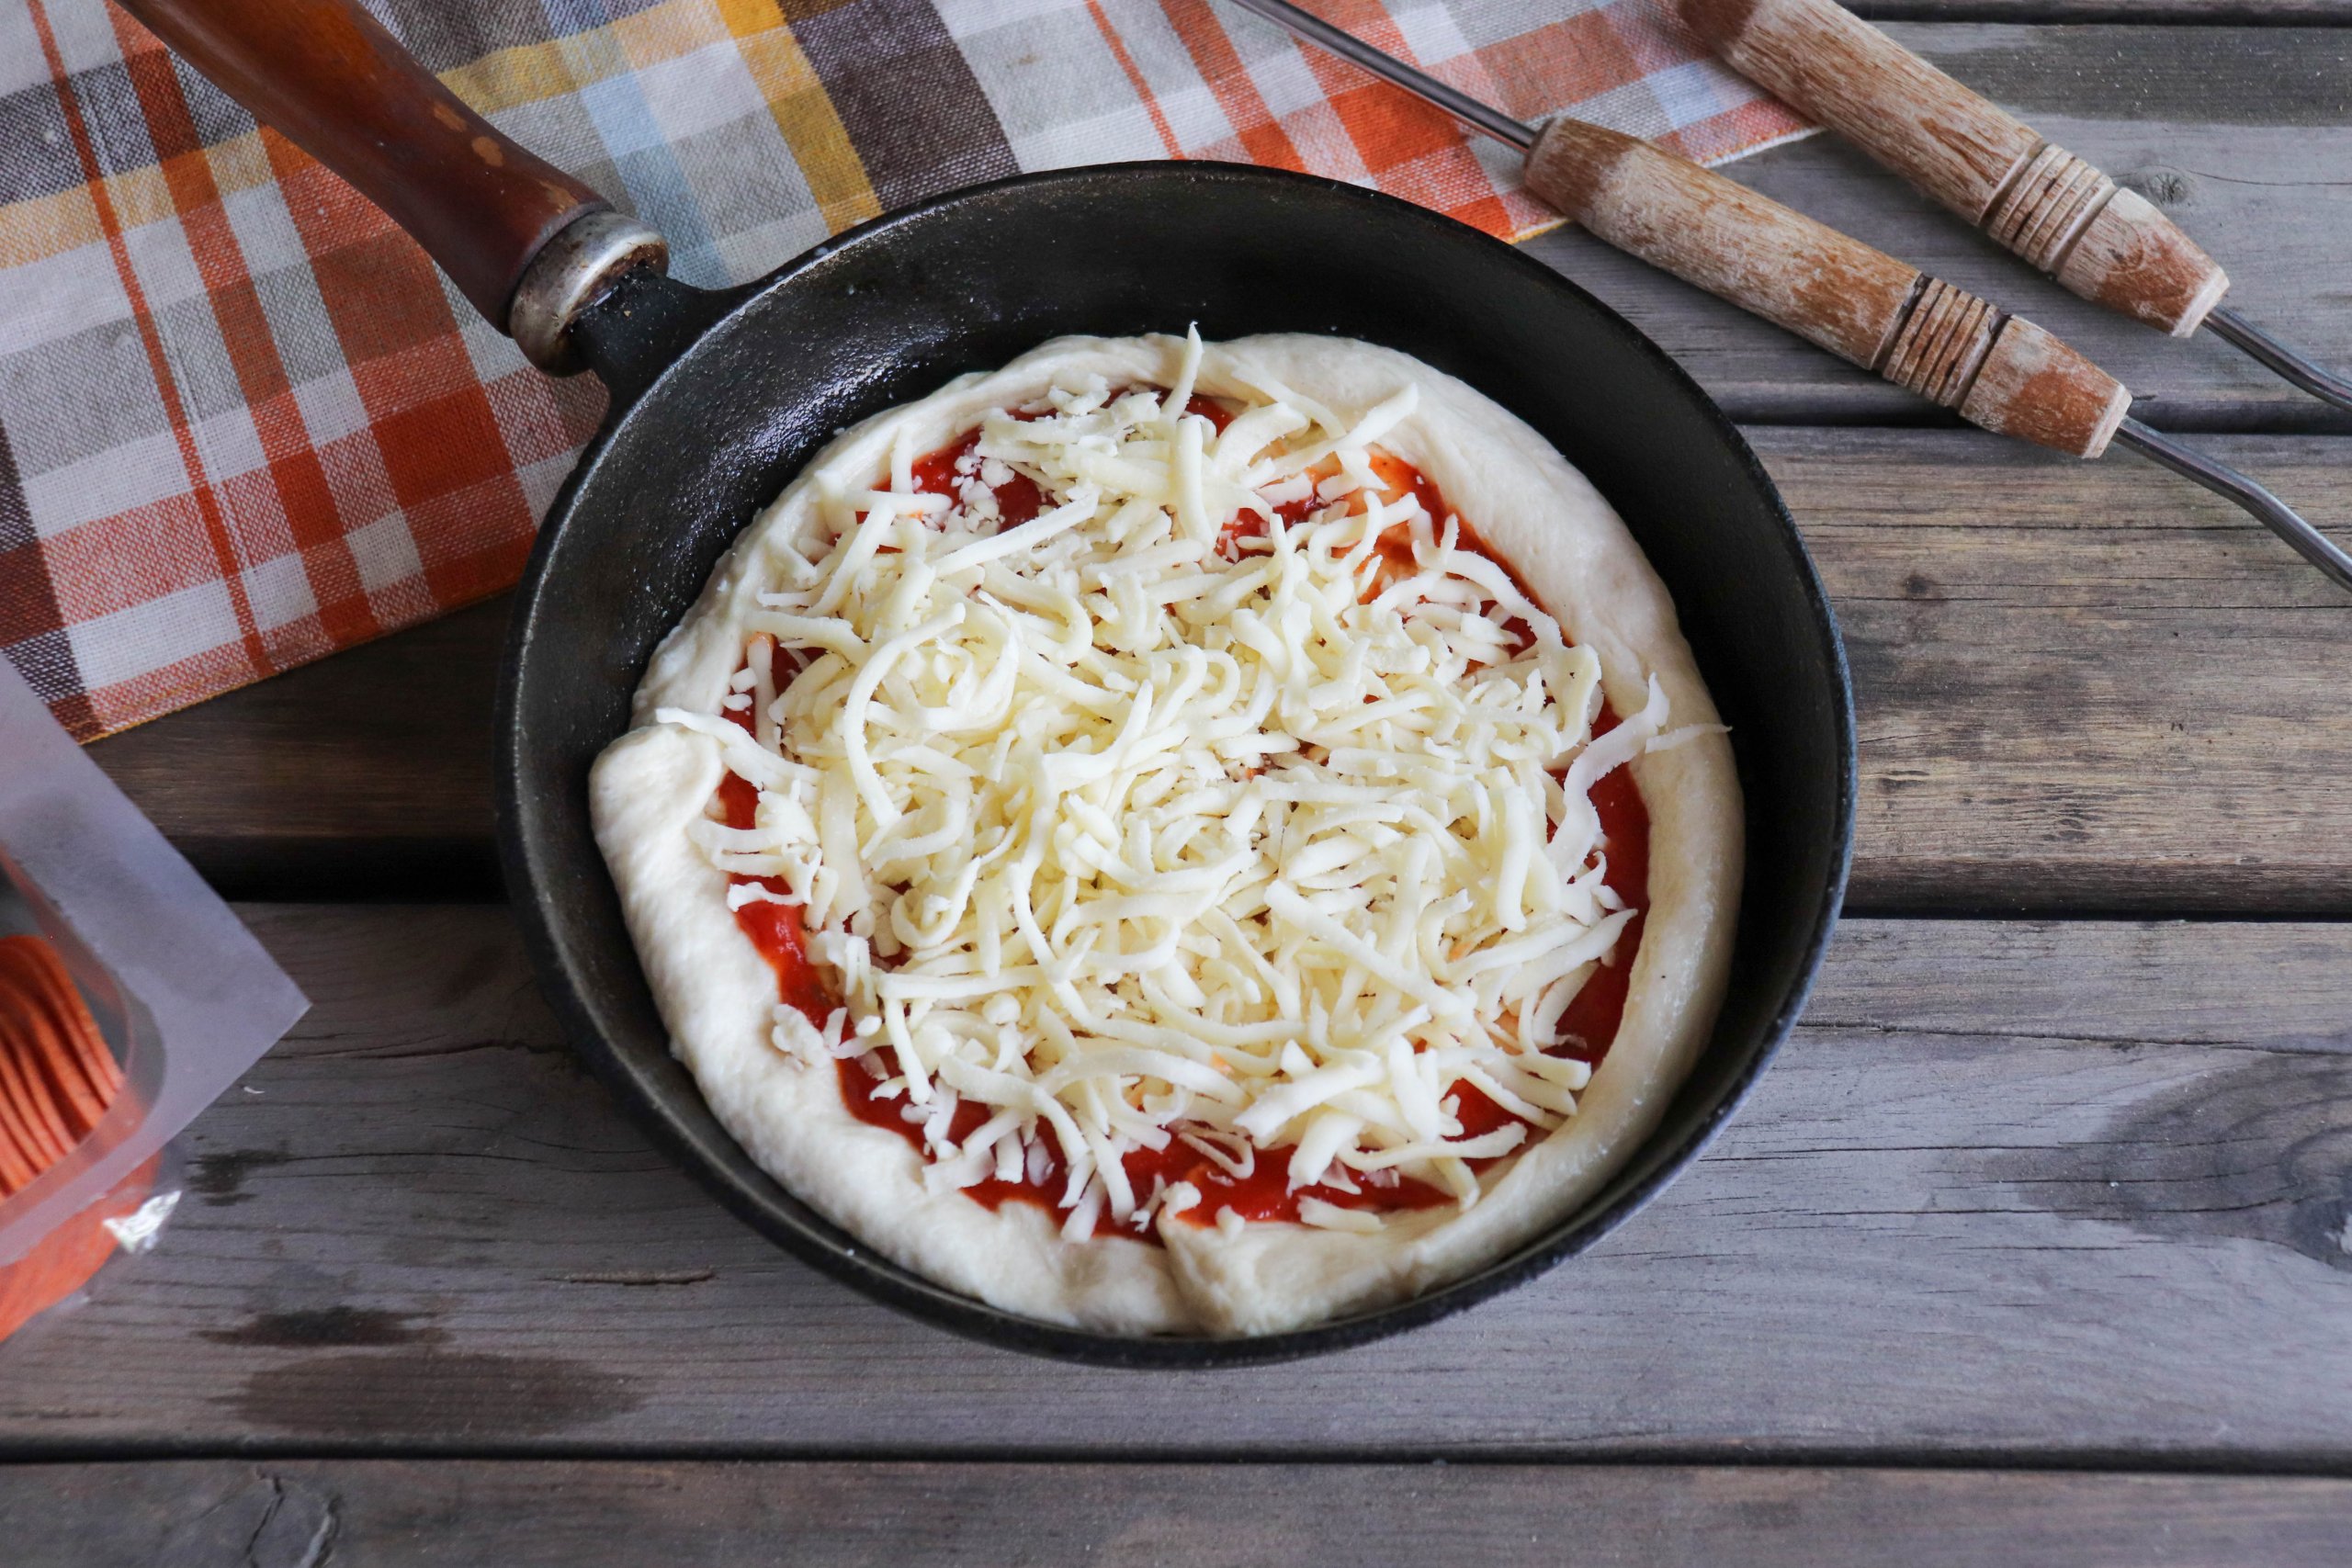 Pizza dough with tomato sauce and shredded mozzarella in a cast iron skillet on a wooden picnic table.